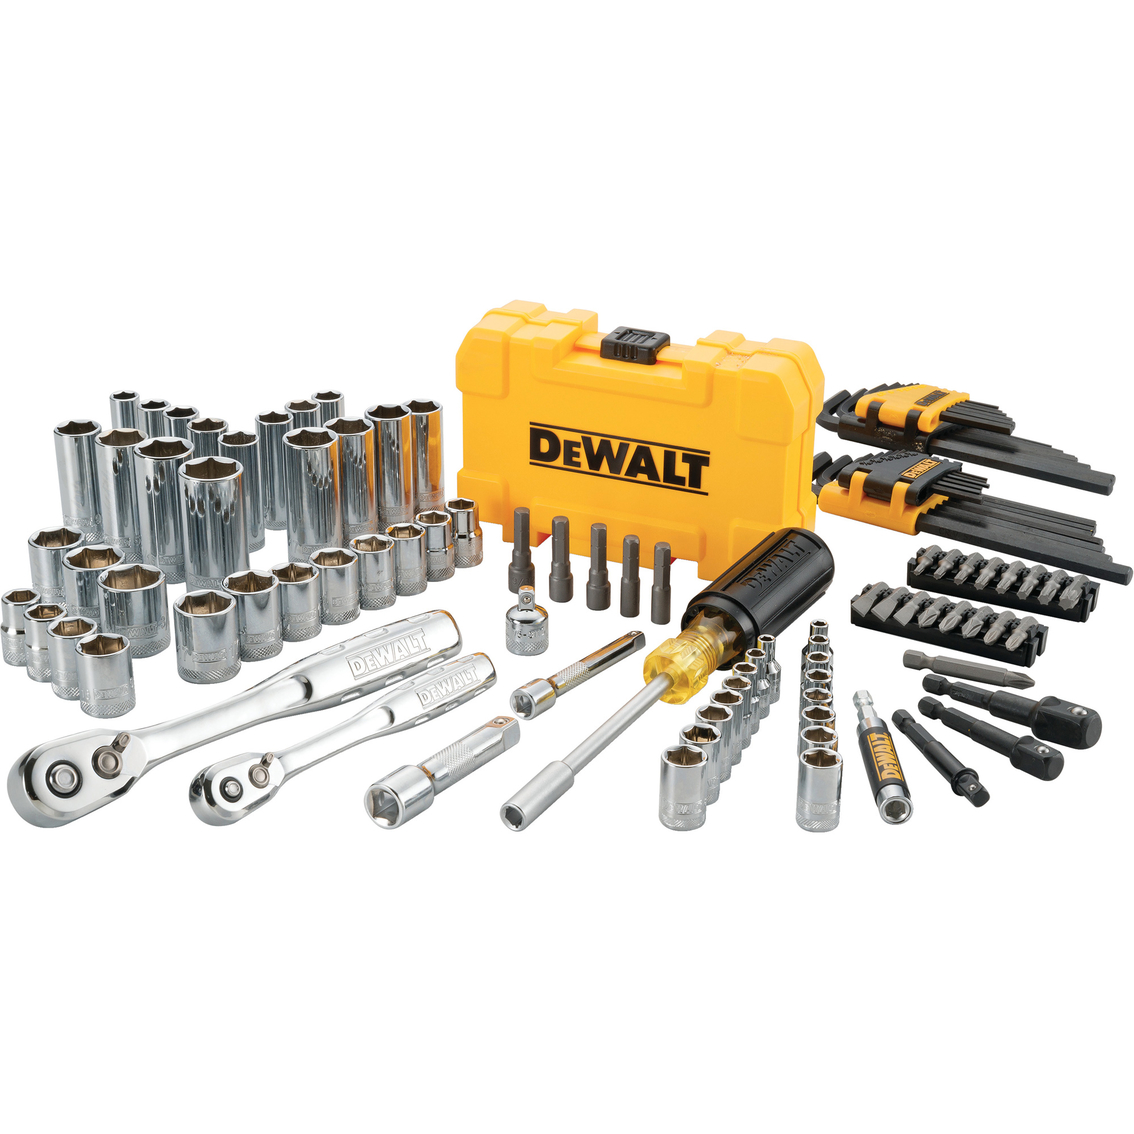 DeWalt 1/4 in. and 3/8 in. Drive 108 pc. Mechanic's Tool Set - Image 2 of 4